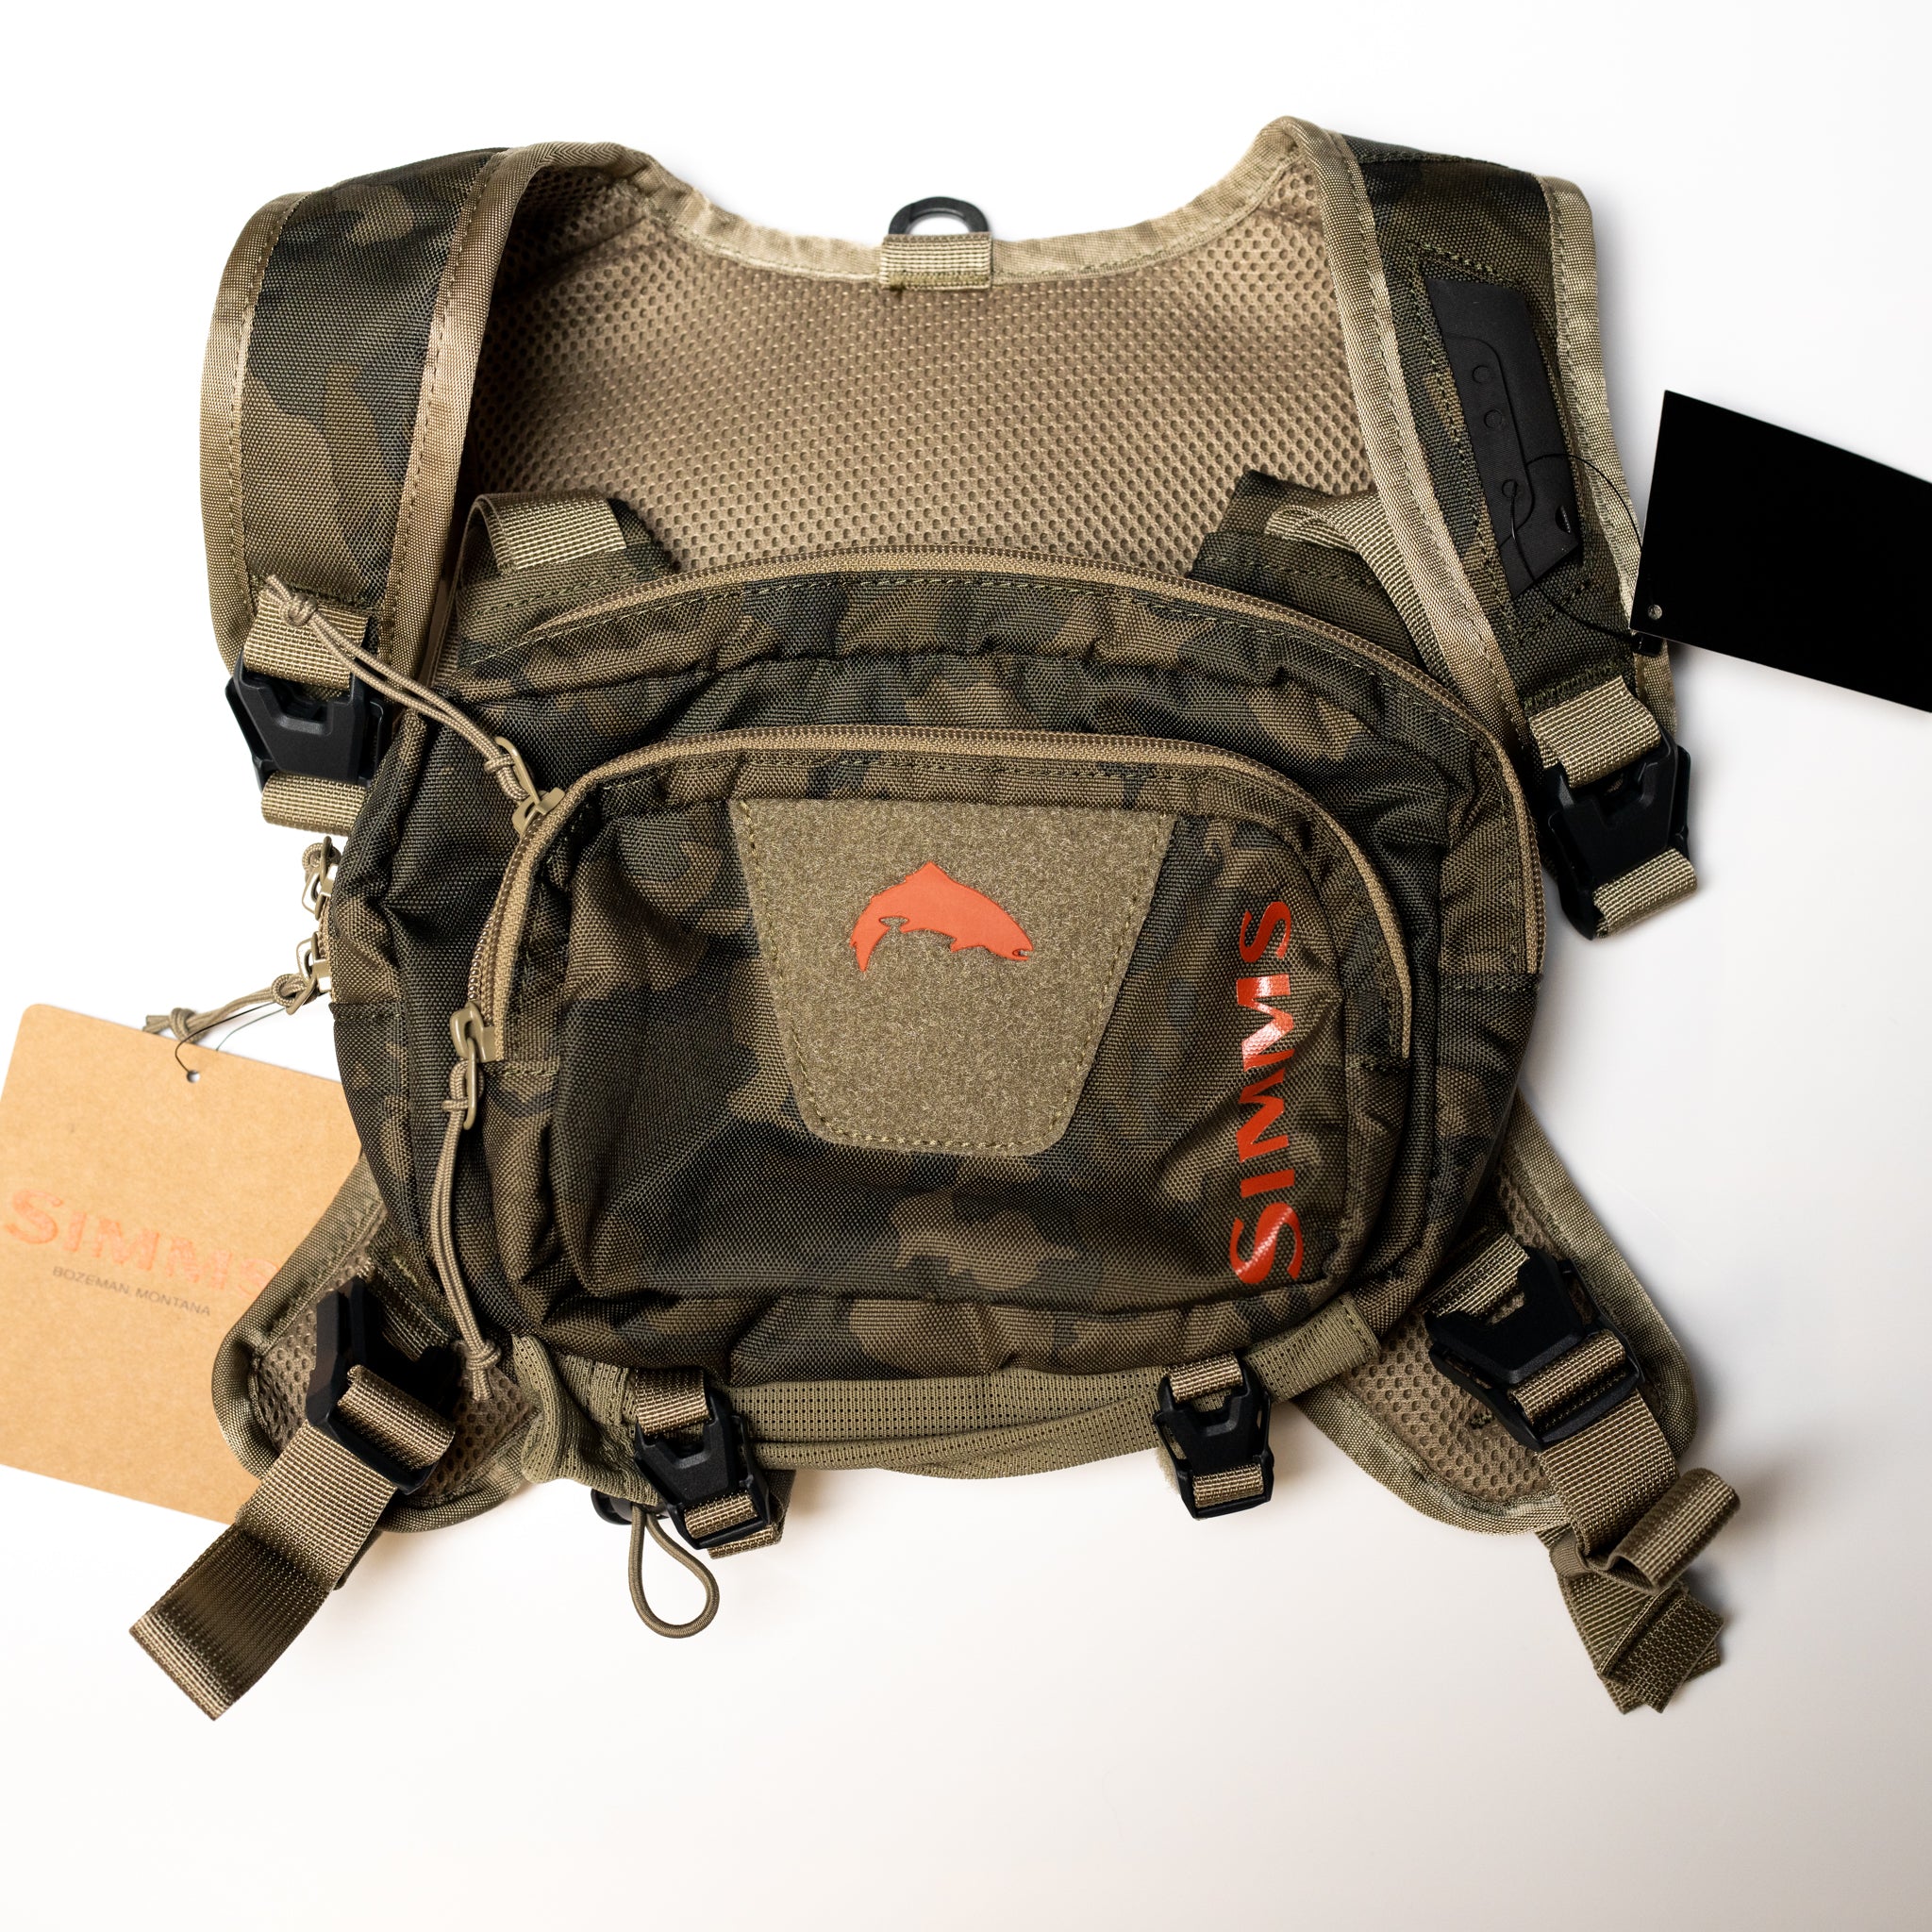 Simms - Tributary Hip Pack - Woodland Camo